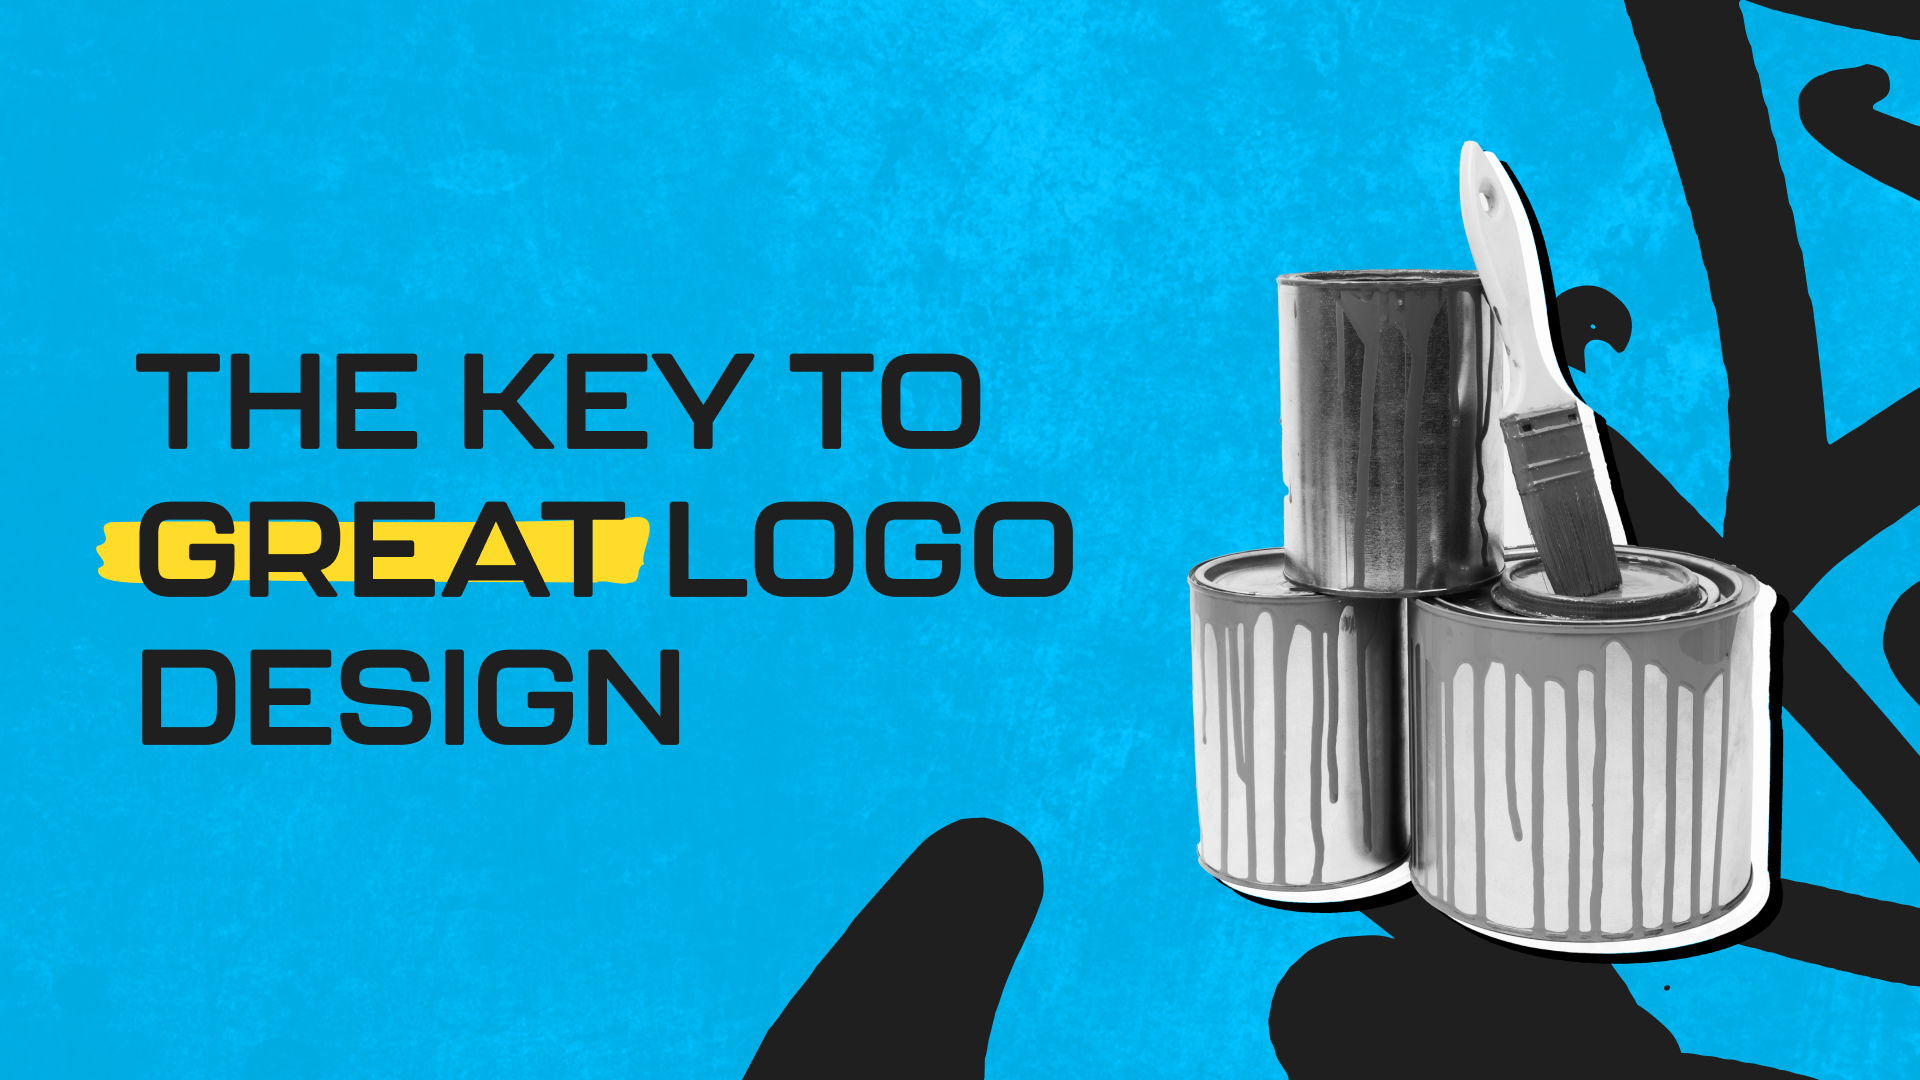 The Key to Great Logo Design